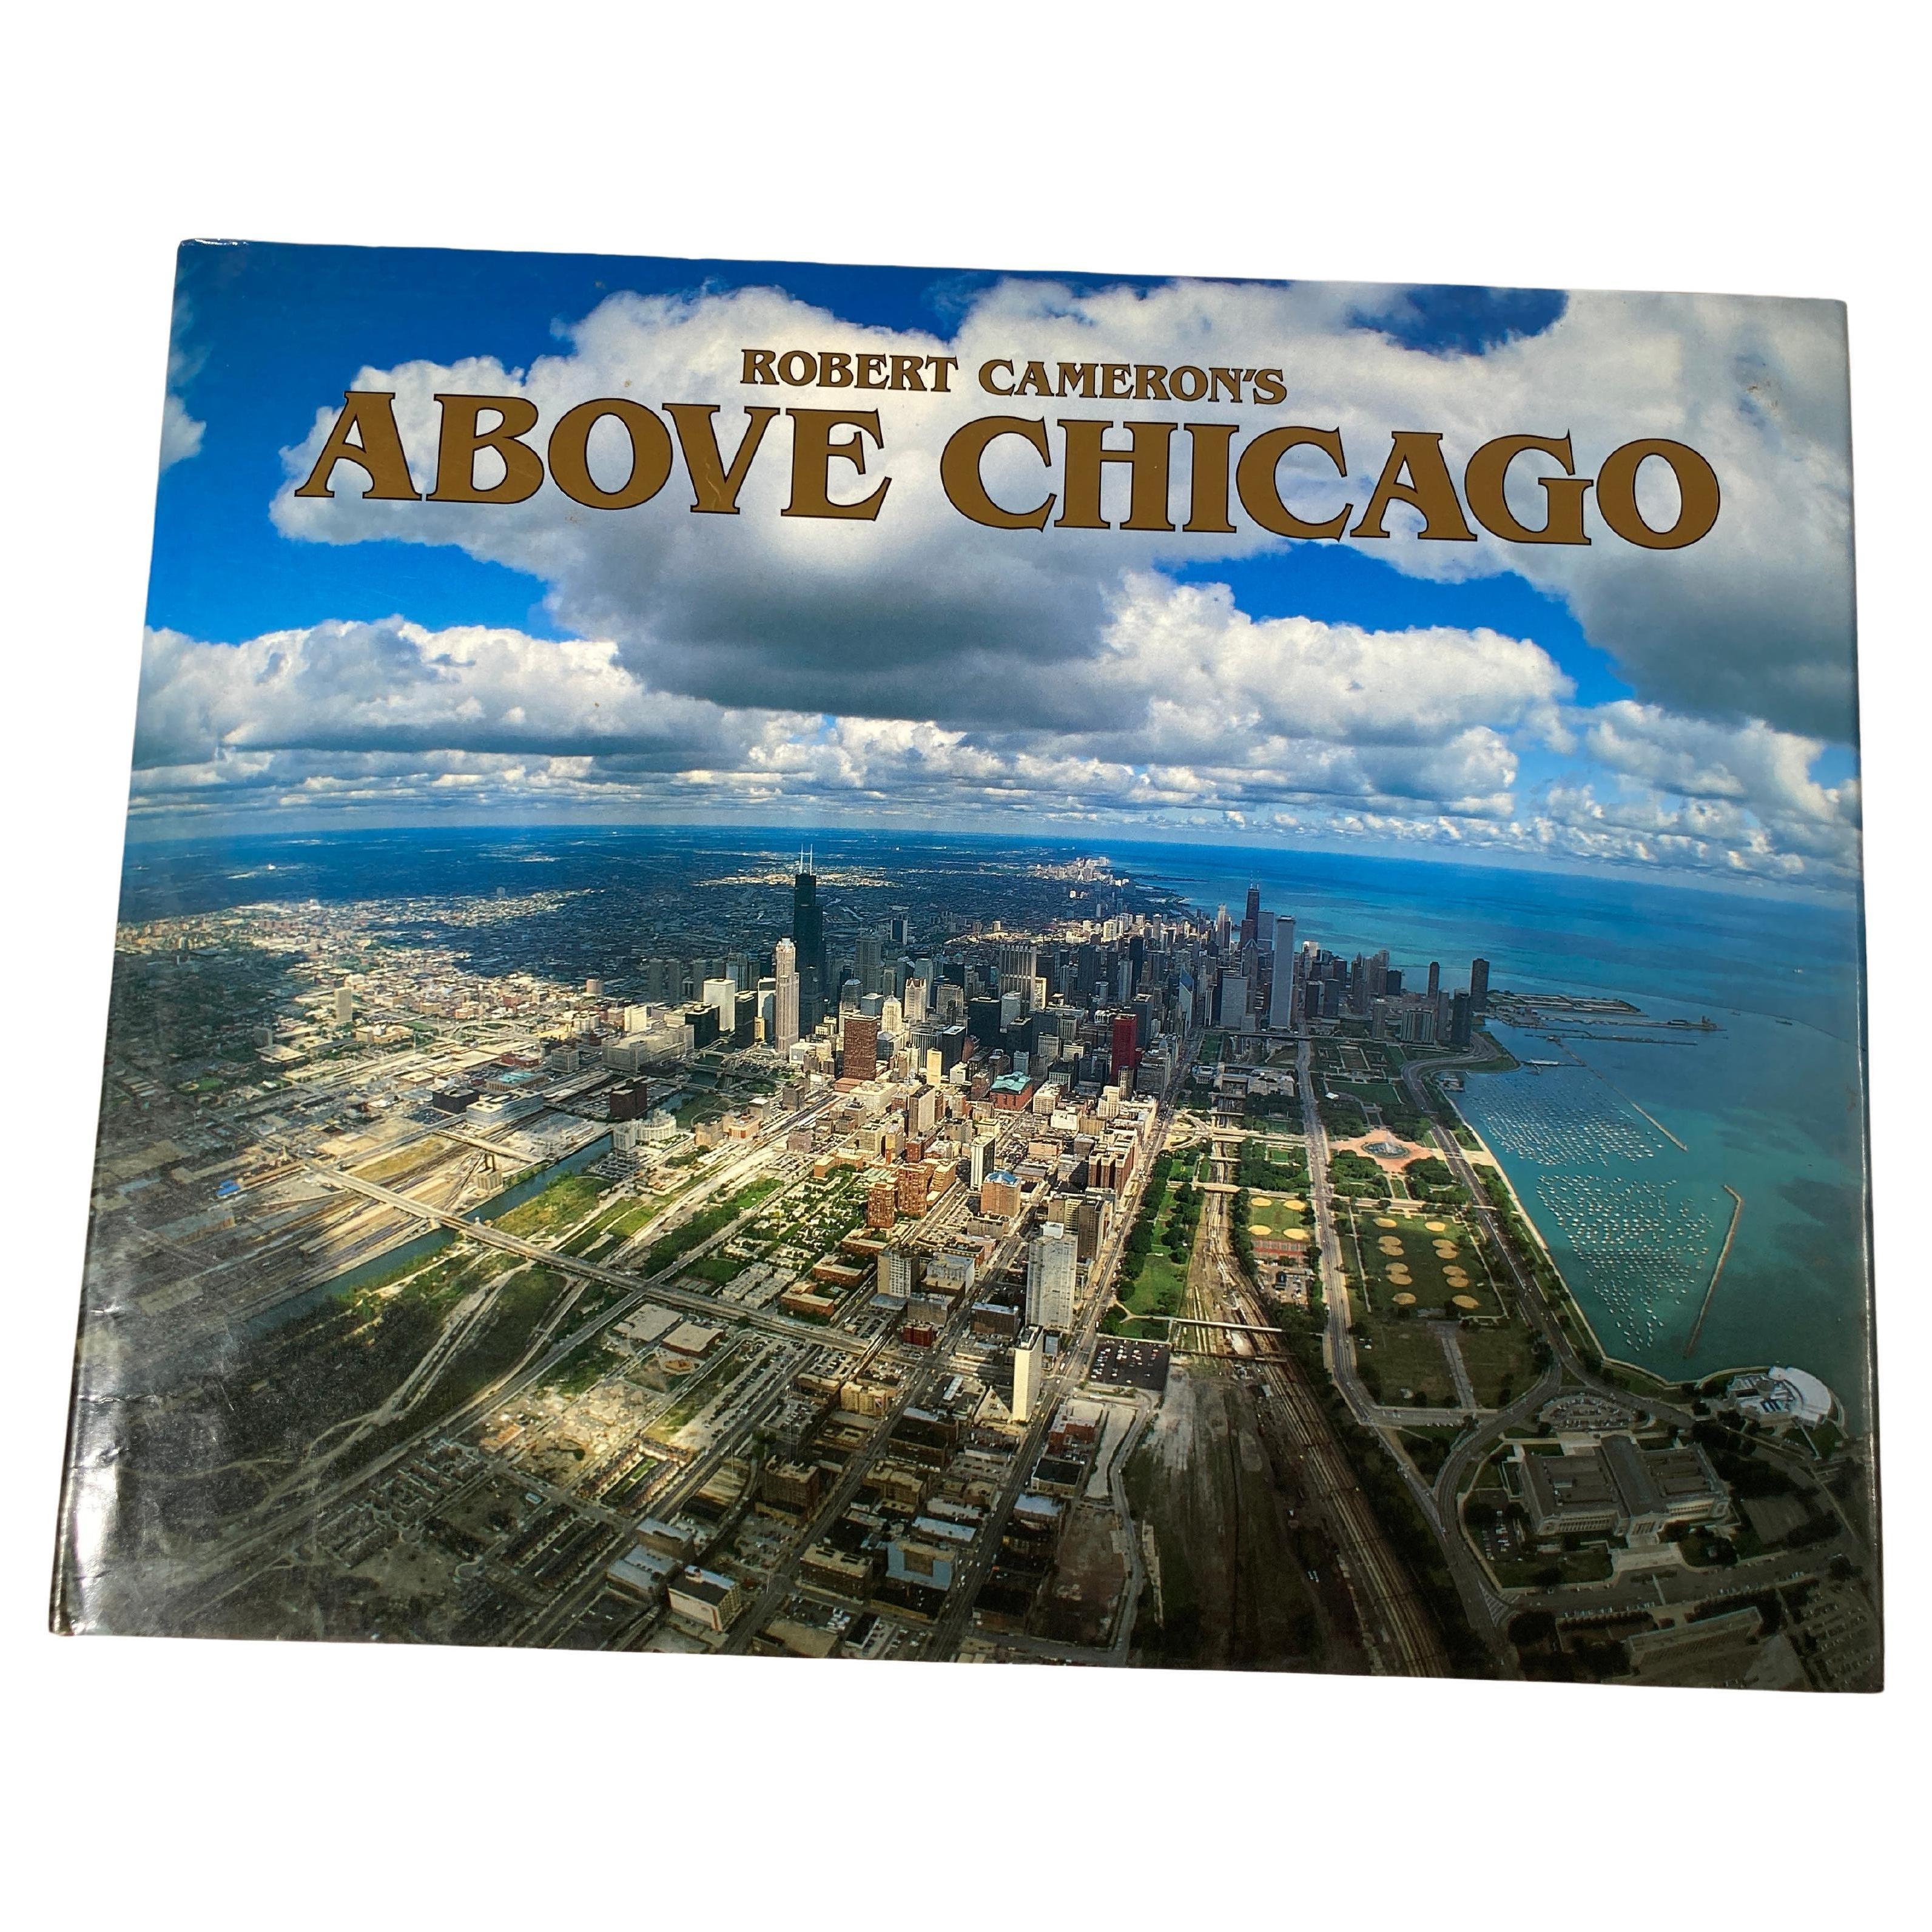 Above Chicago by Robert Cameron